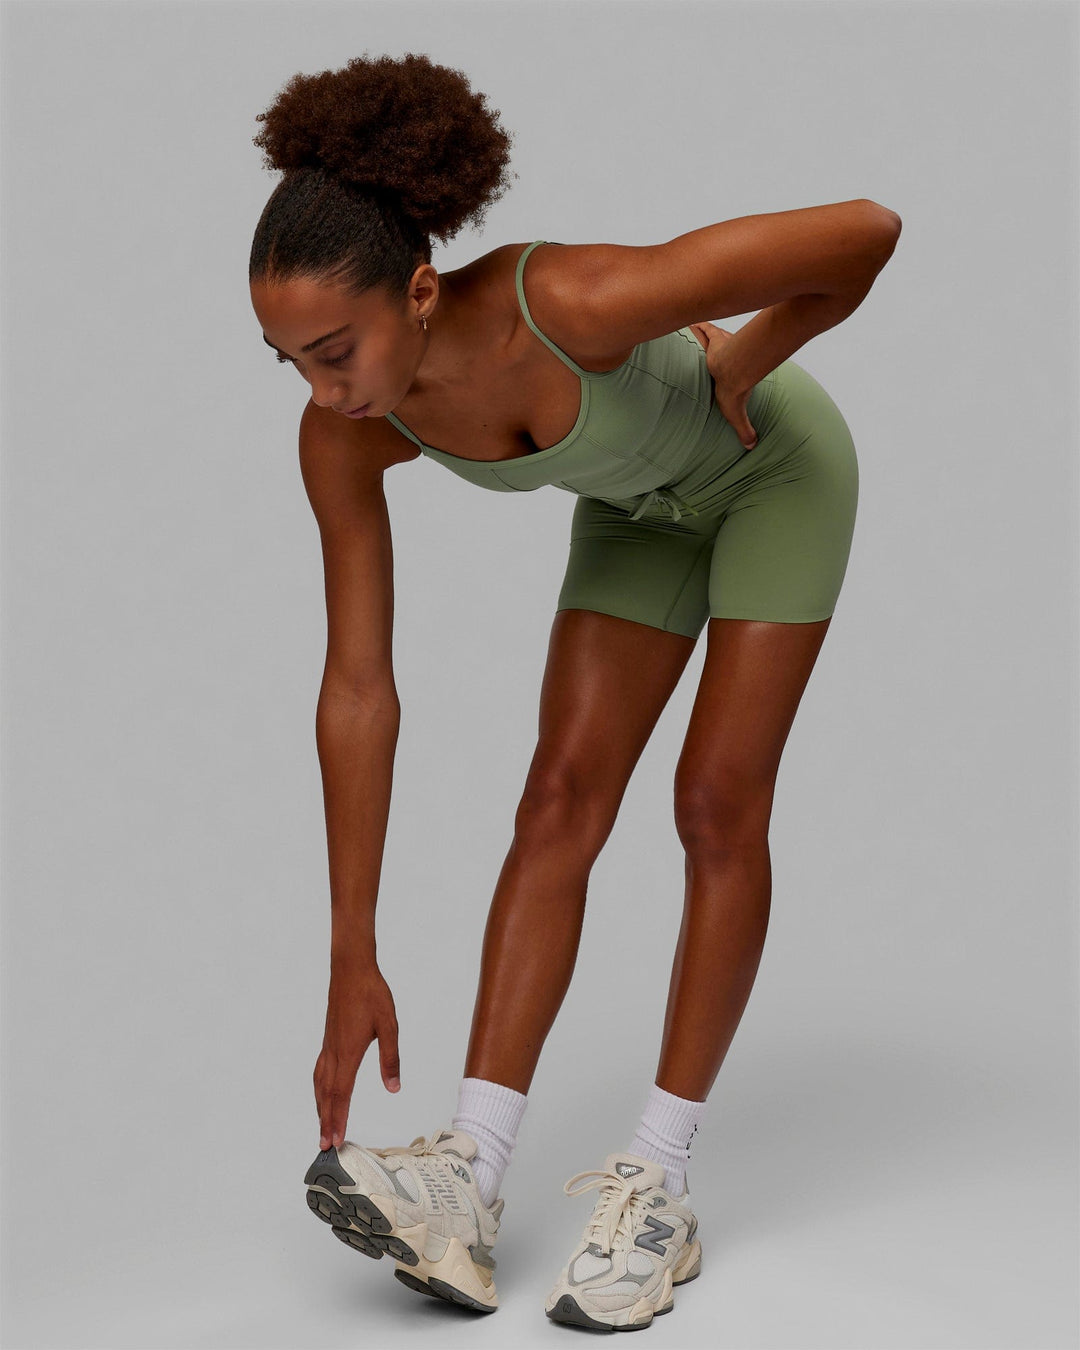 Woman wearing Resistance Mid Short Tights - Bayleaf